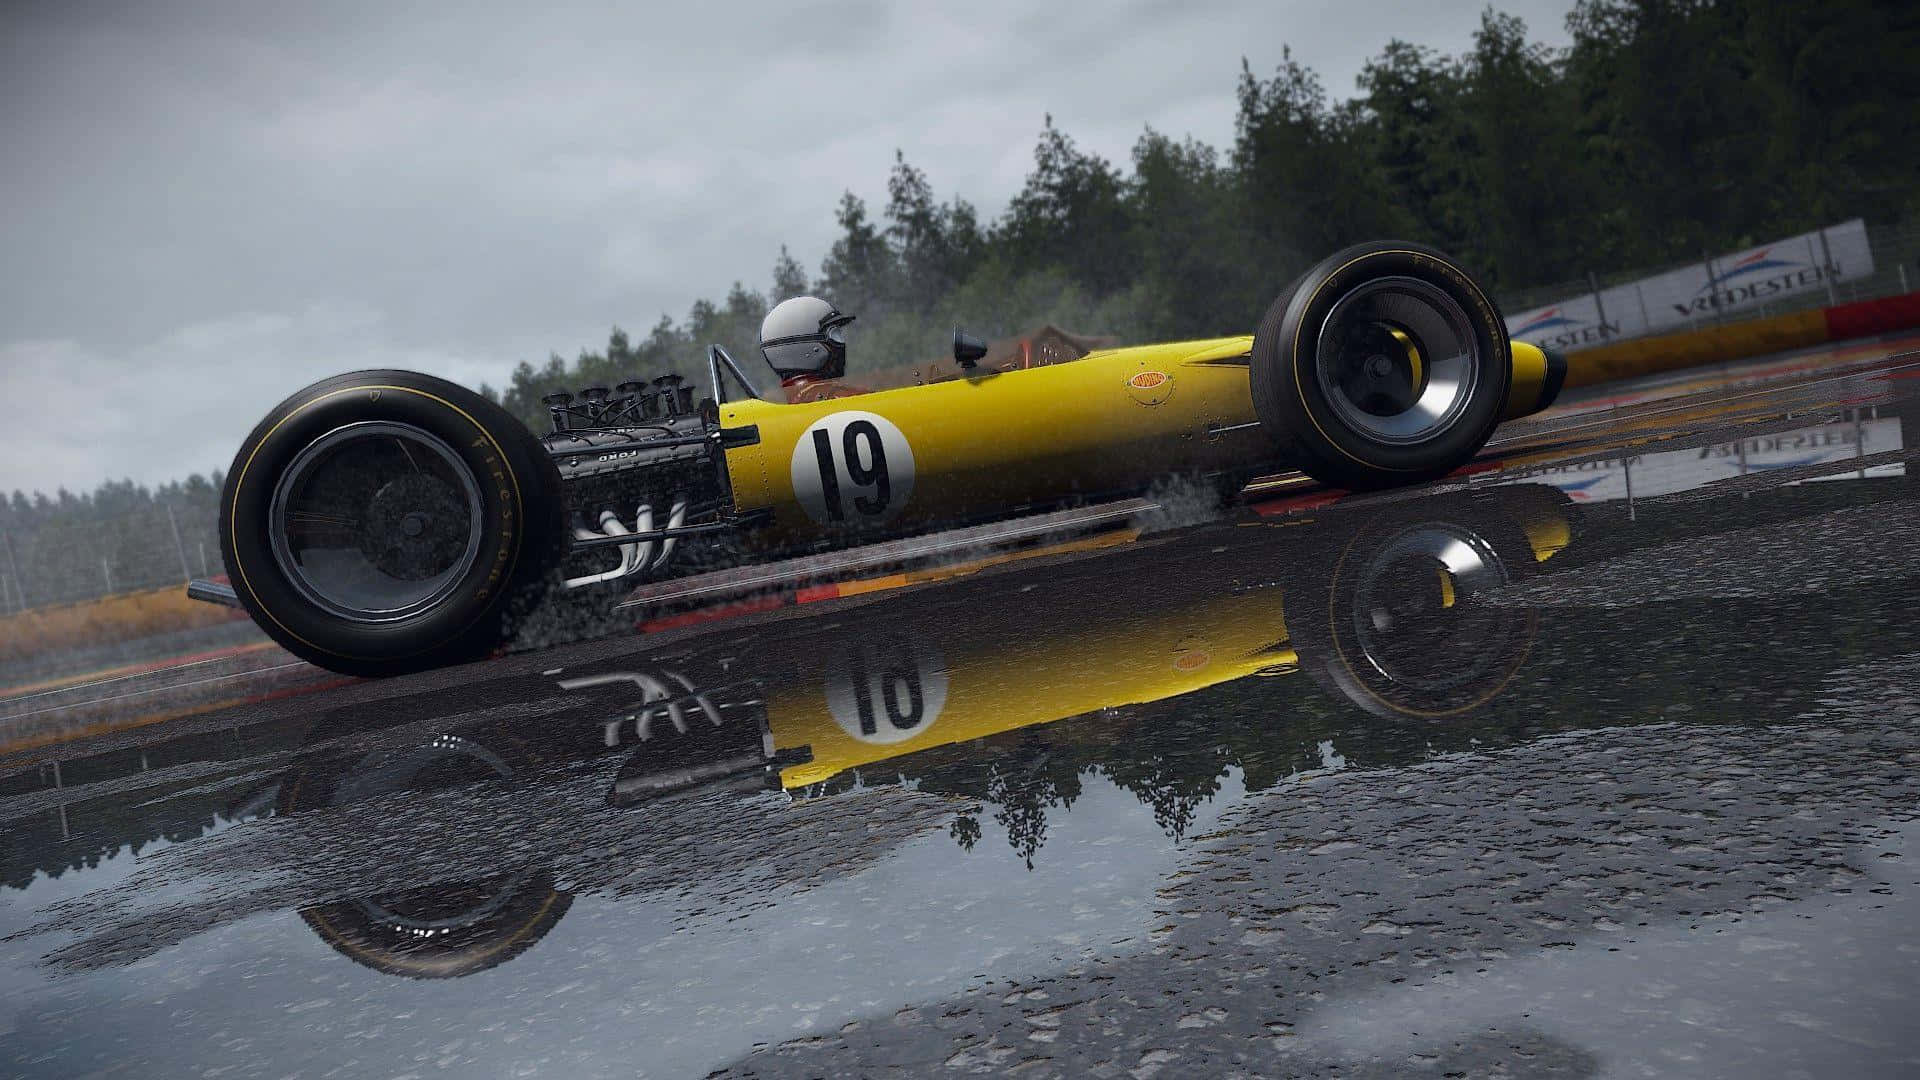 Take control of the track in the award-winning Best Project Cars 2